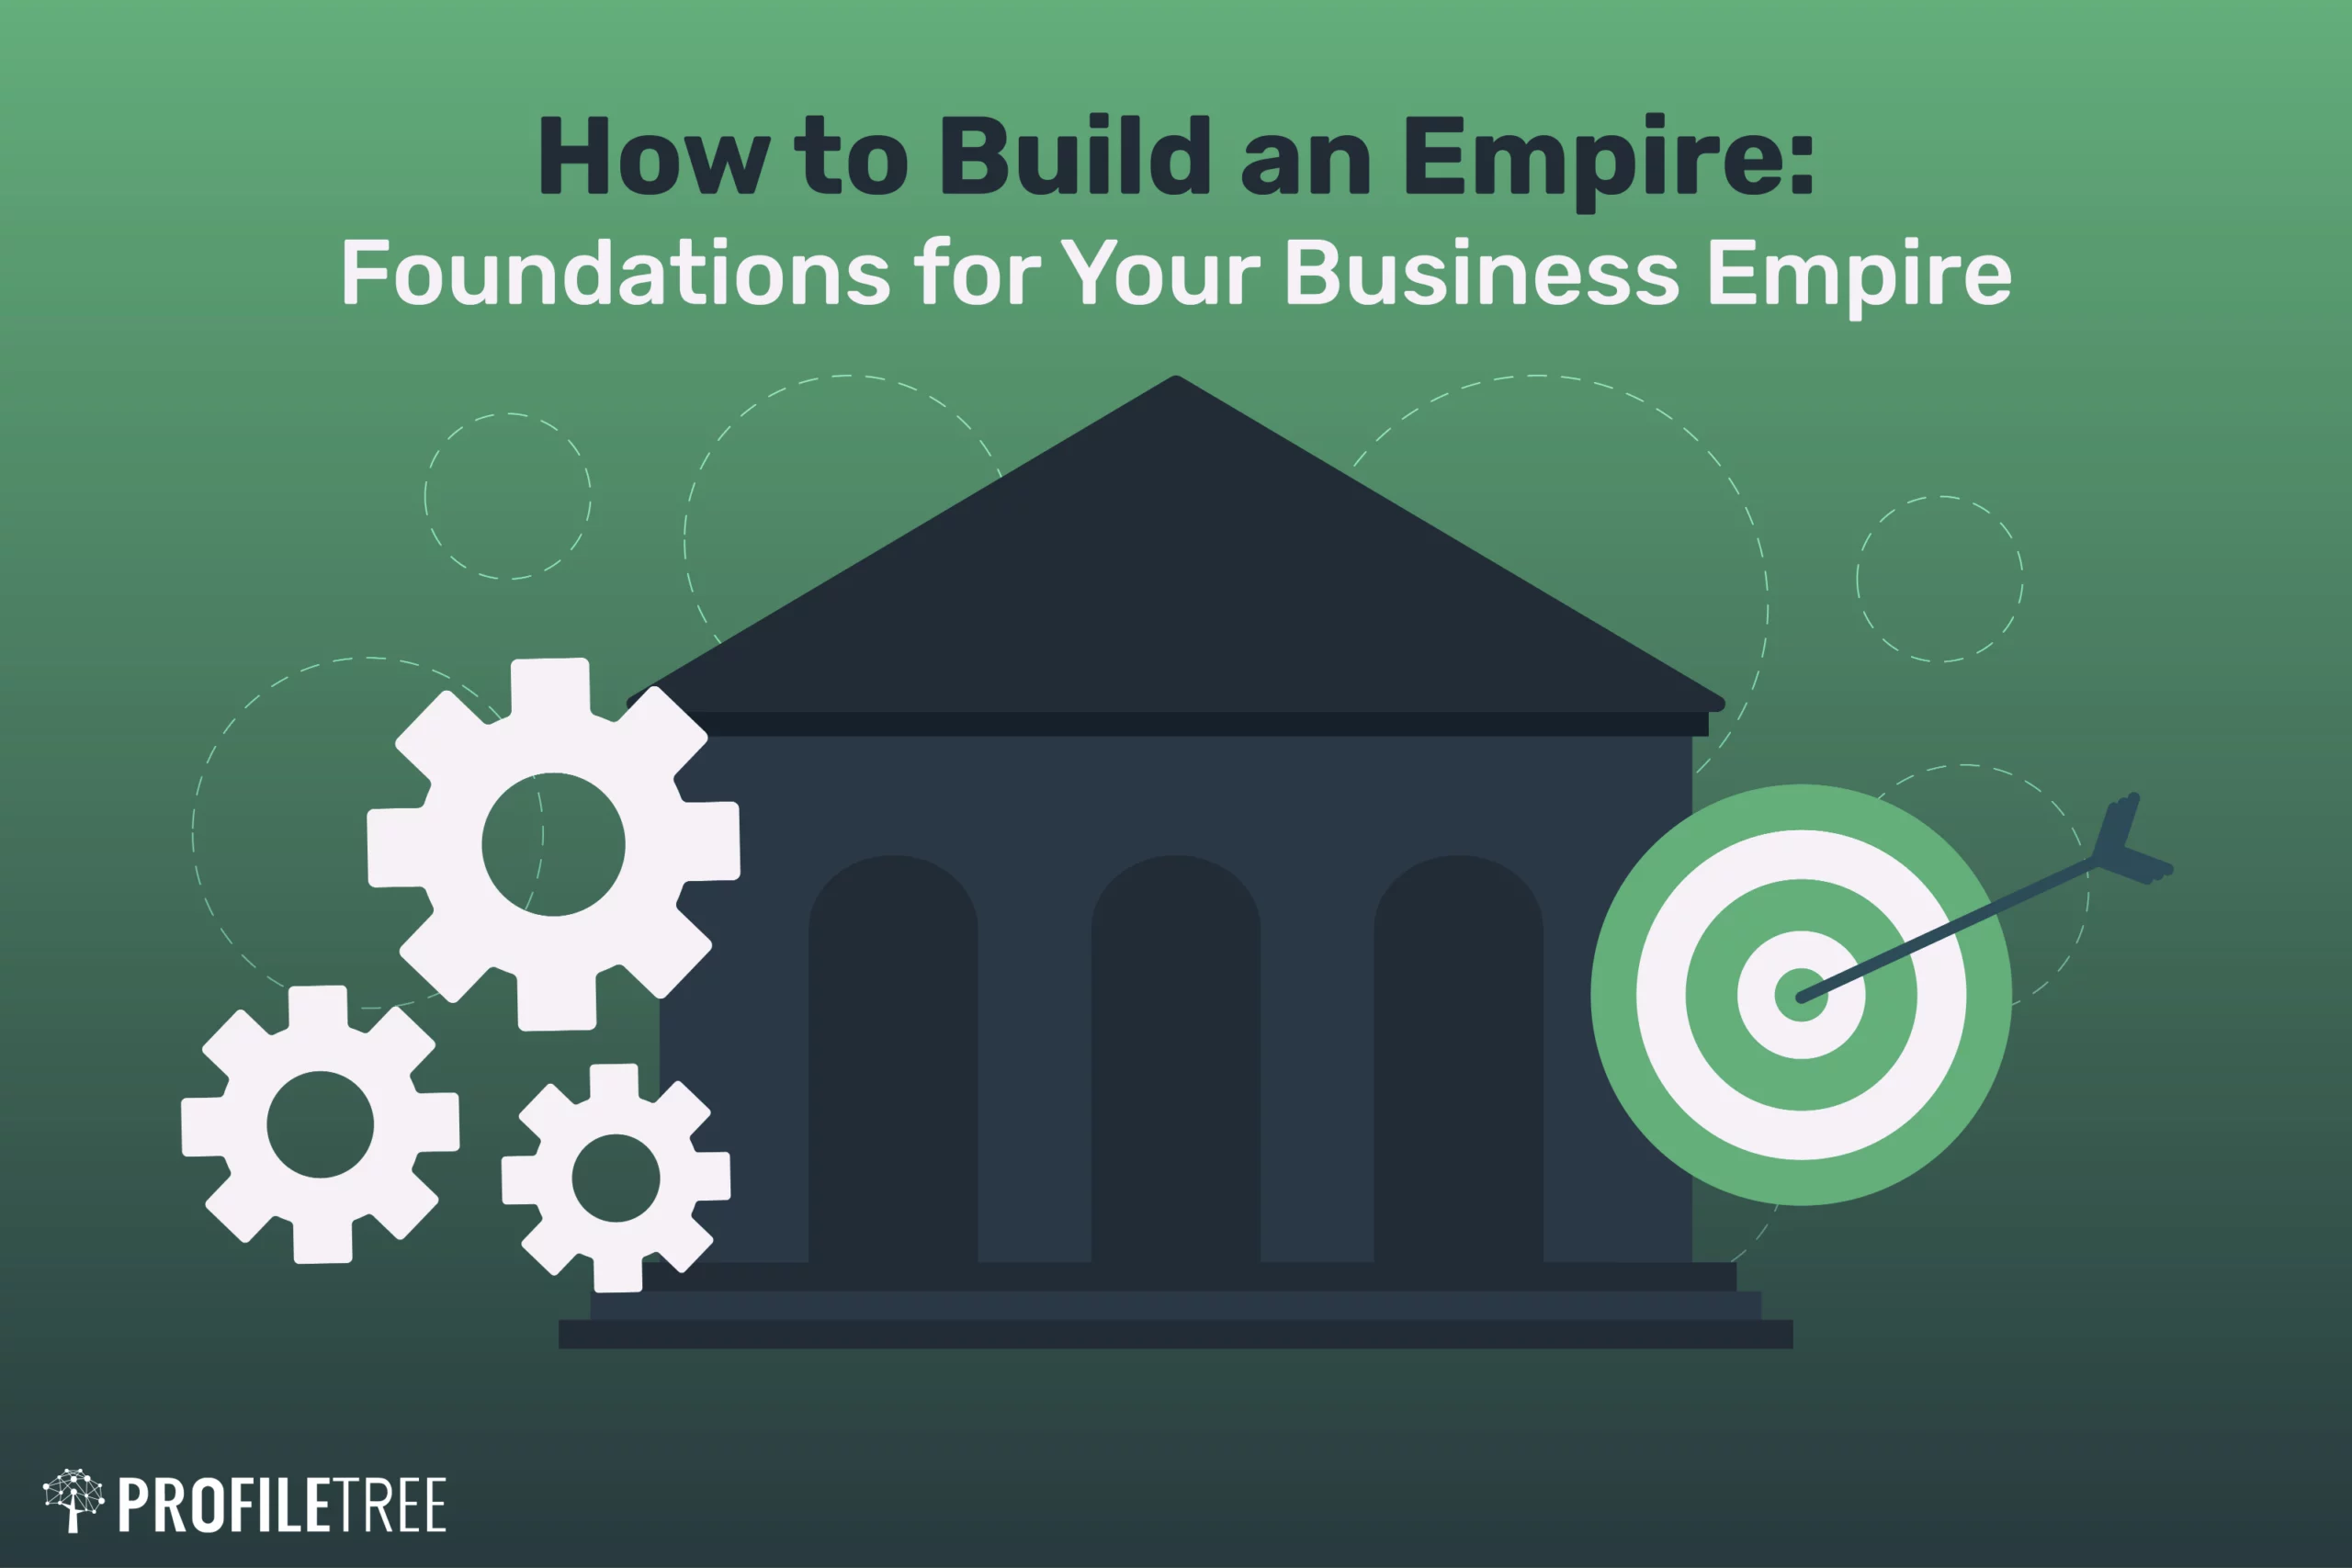 How to build an empire